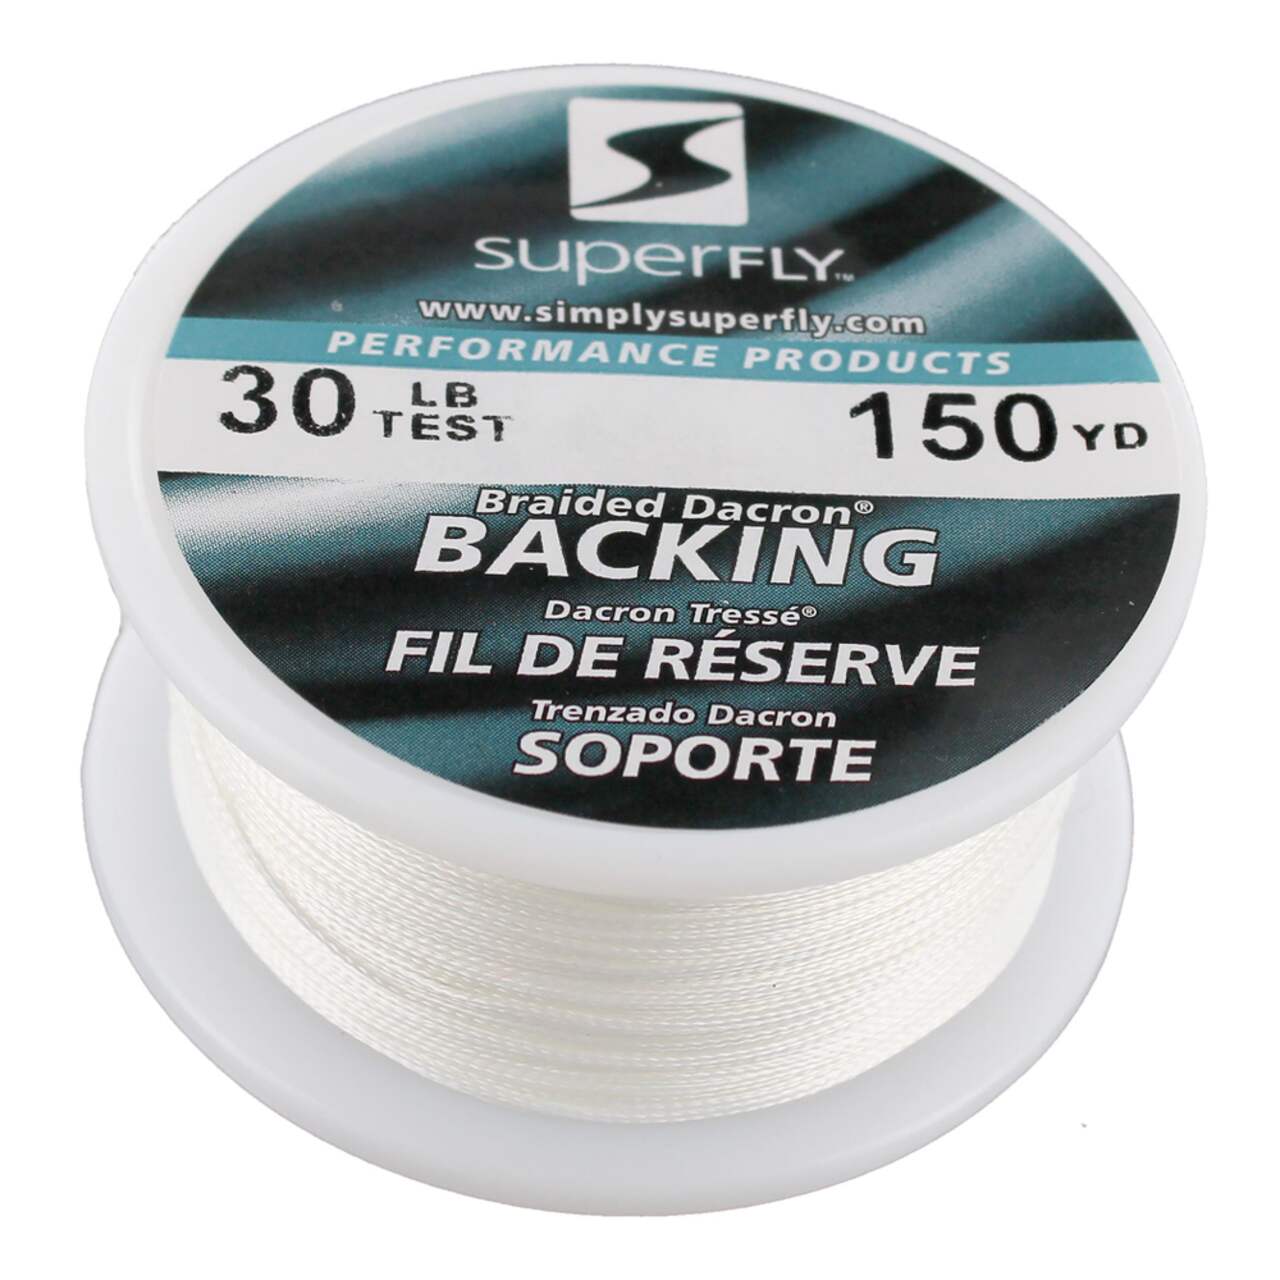 Superfly Copoly Tippet Material, Size 5, 4-lb Test